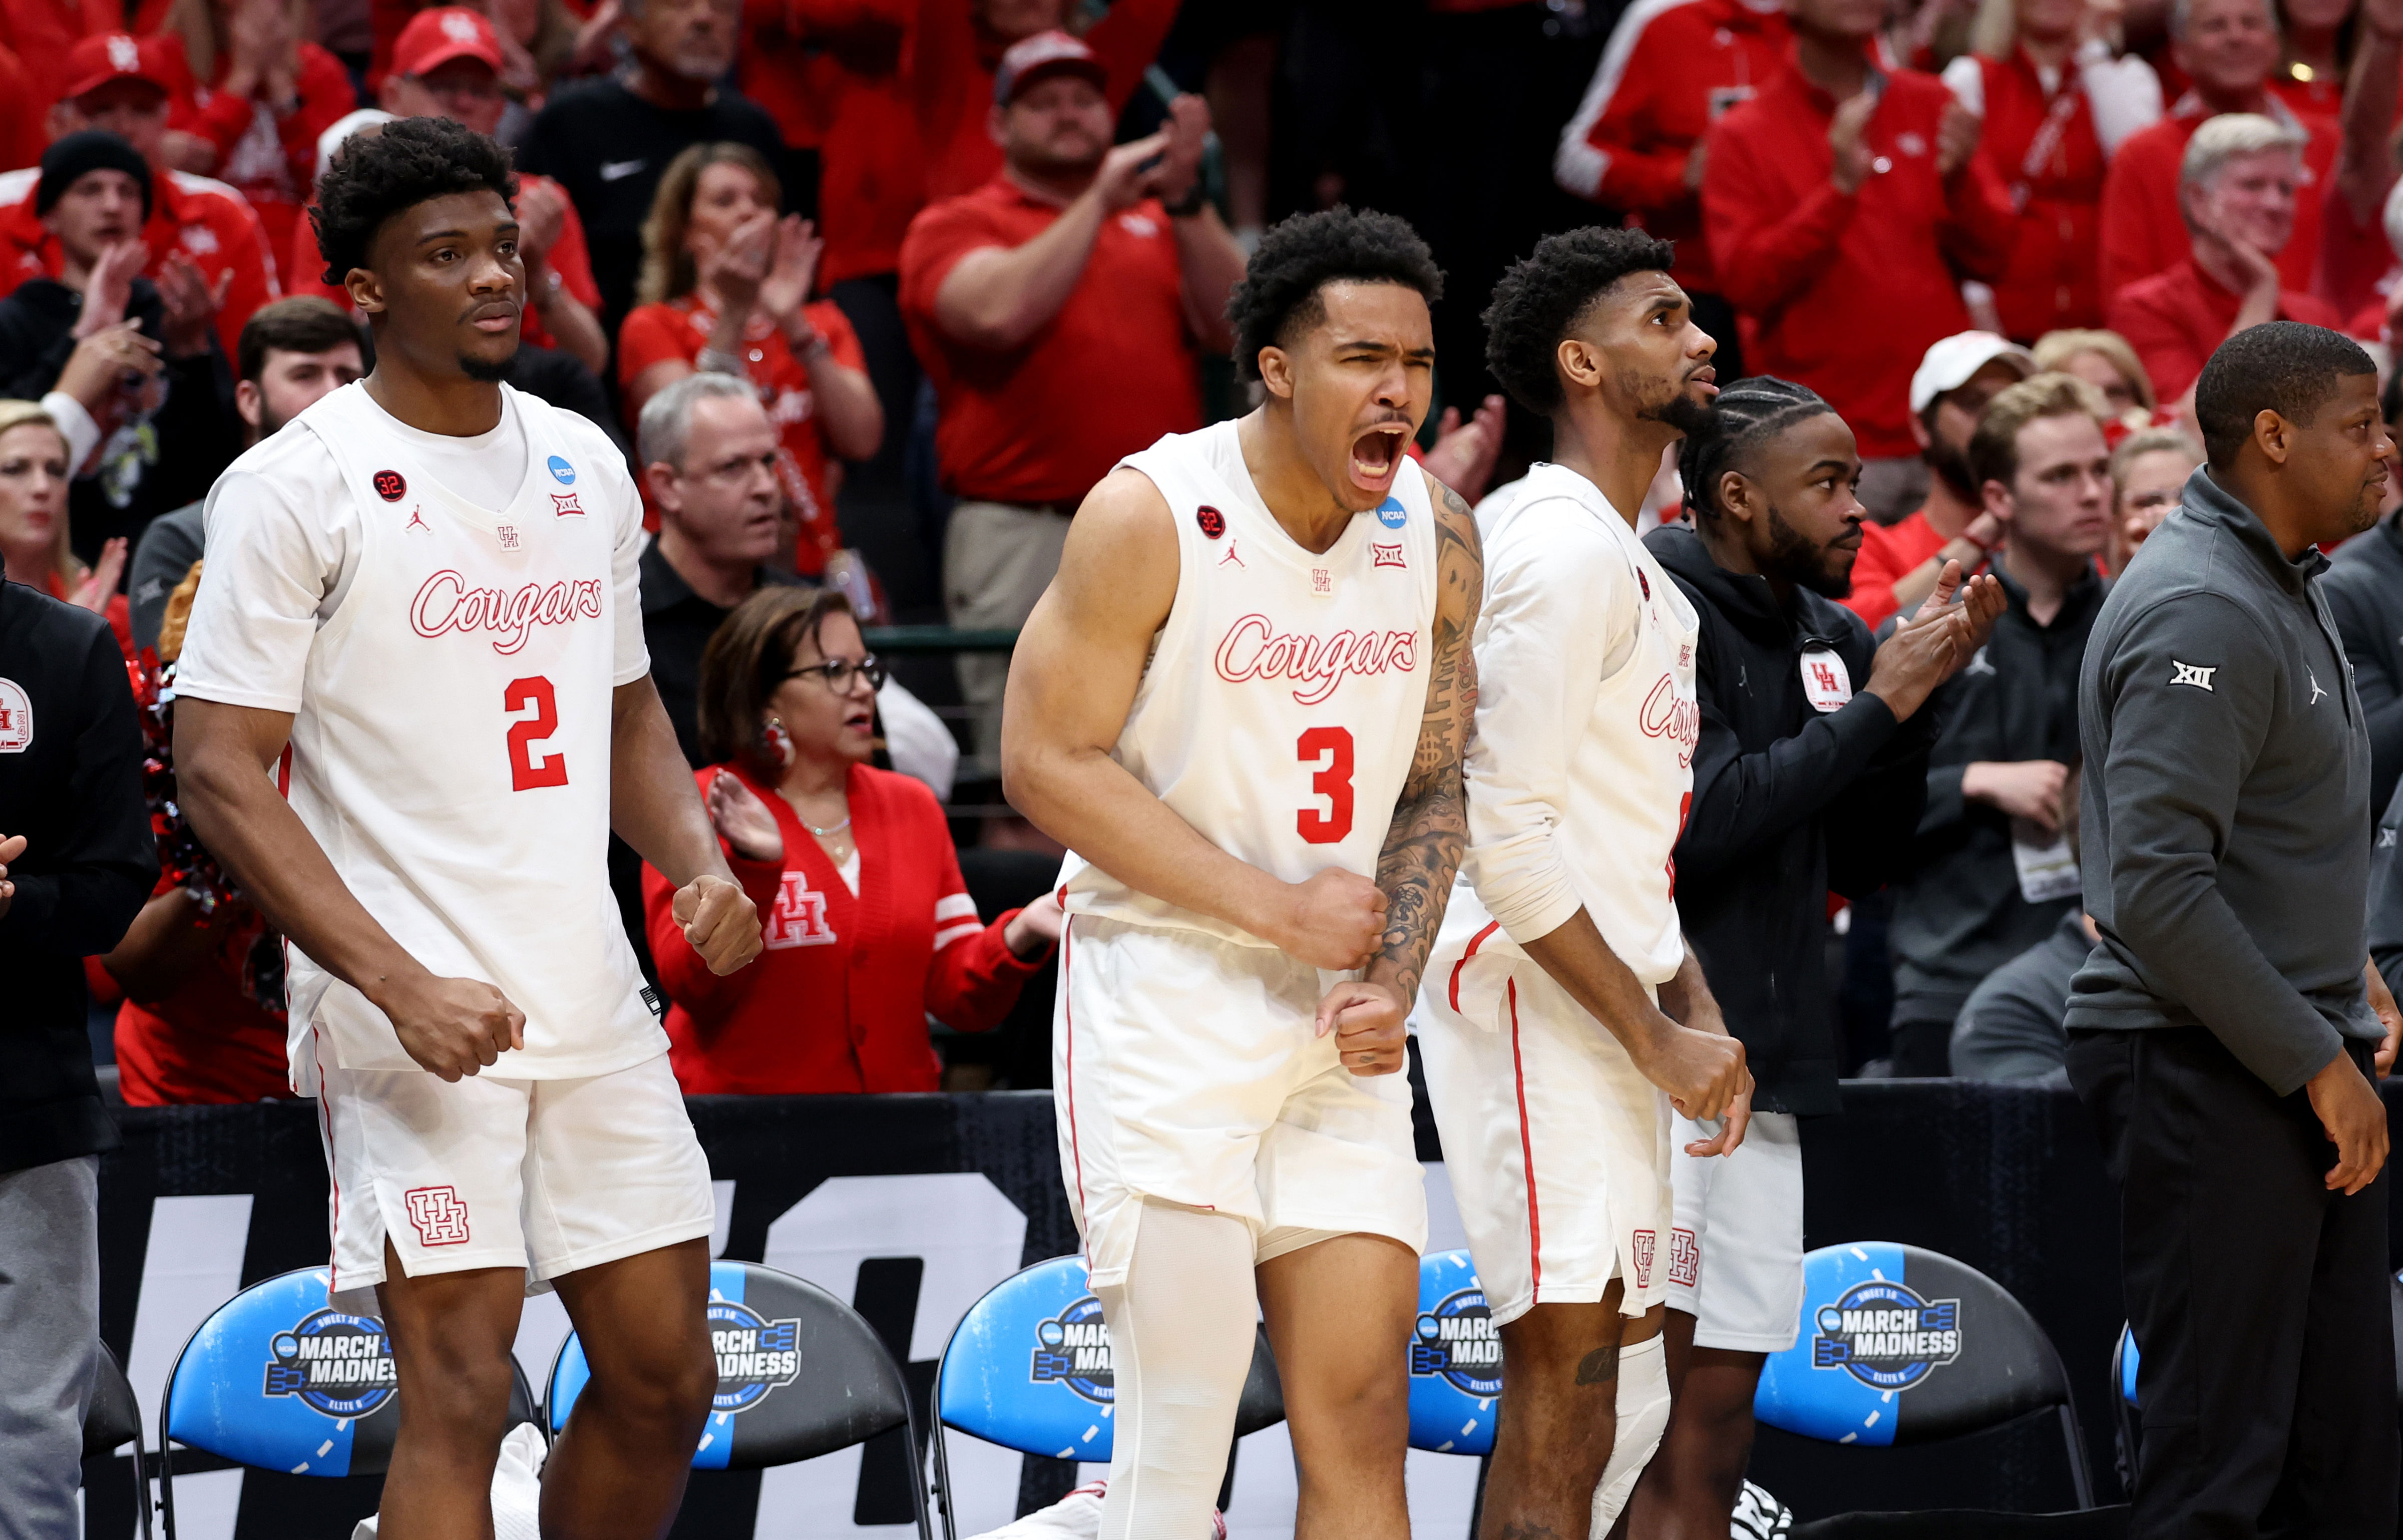 The Houston Cougars placed second in NET behind UConn in the season-ending rankings.